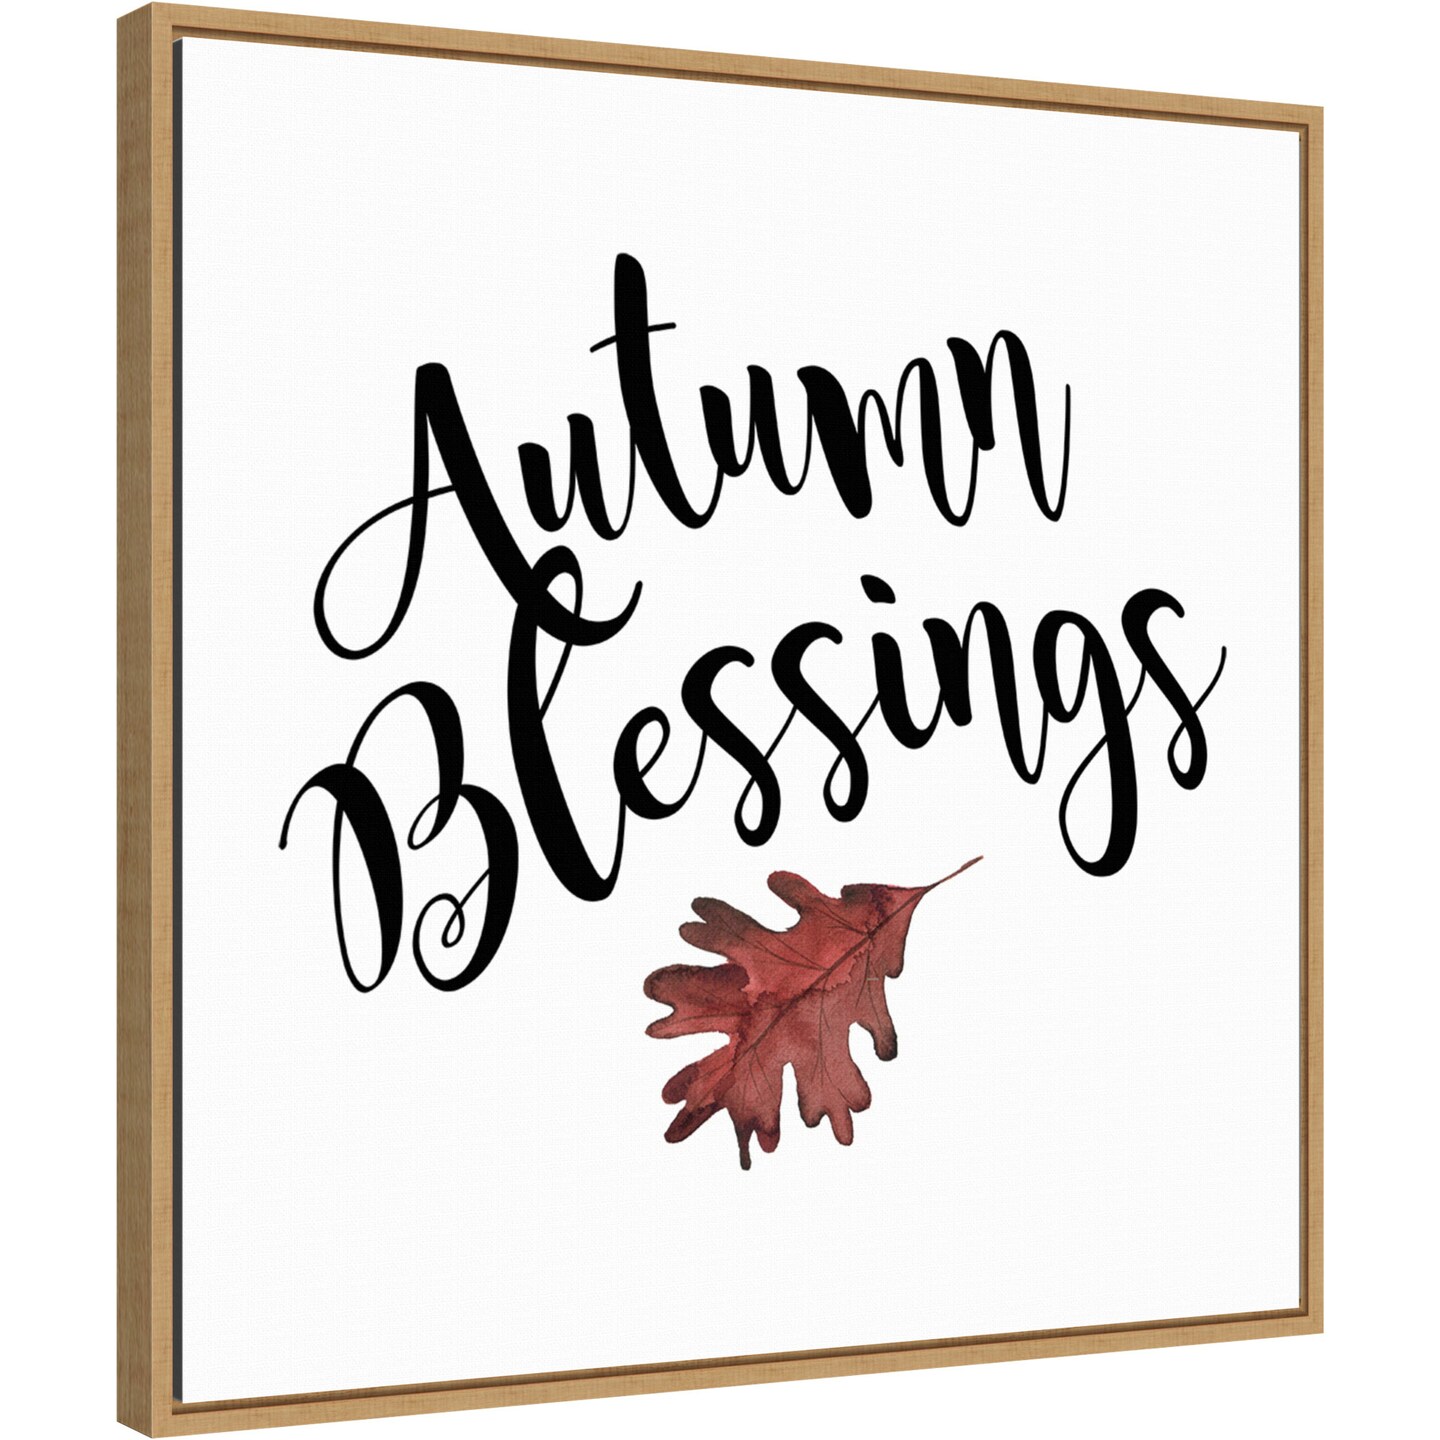 Autumn Blessings by Amanti Art Portfolio 22-in. W x 22-in. H. Canvas Wall Art Print Framed in Natural